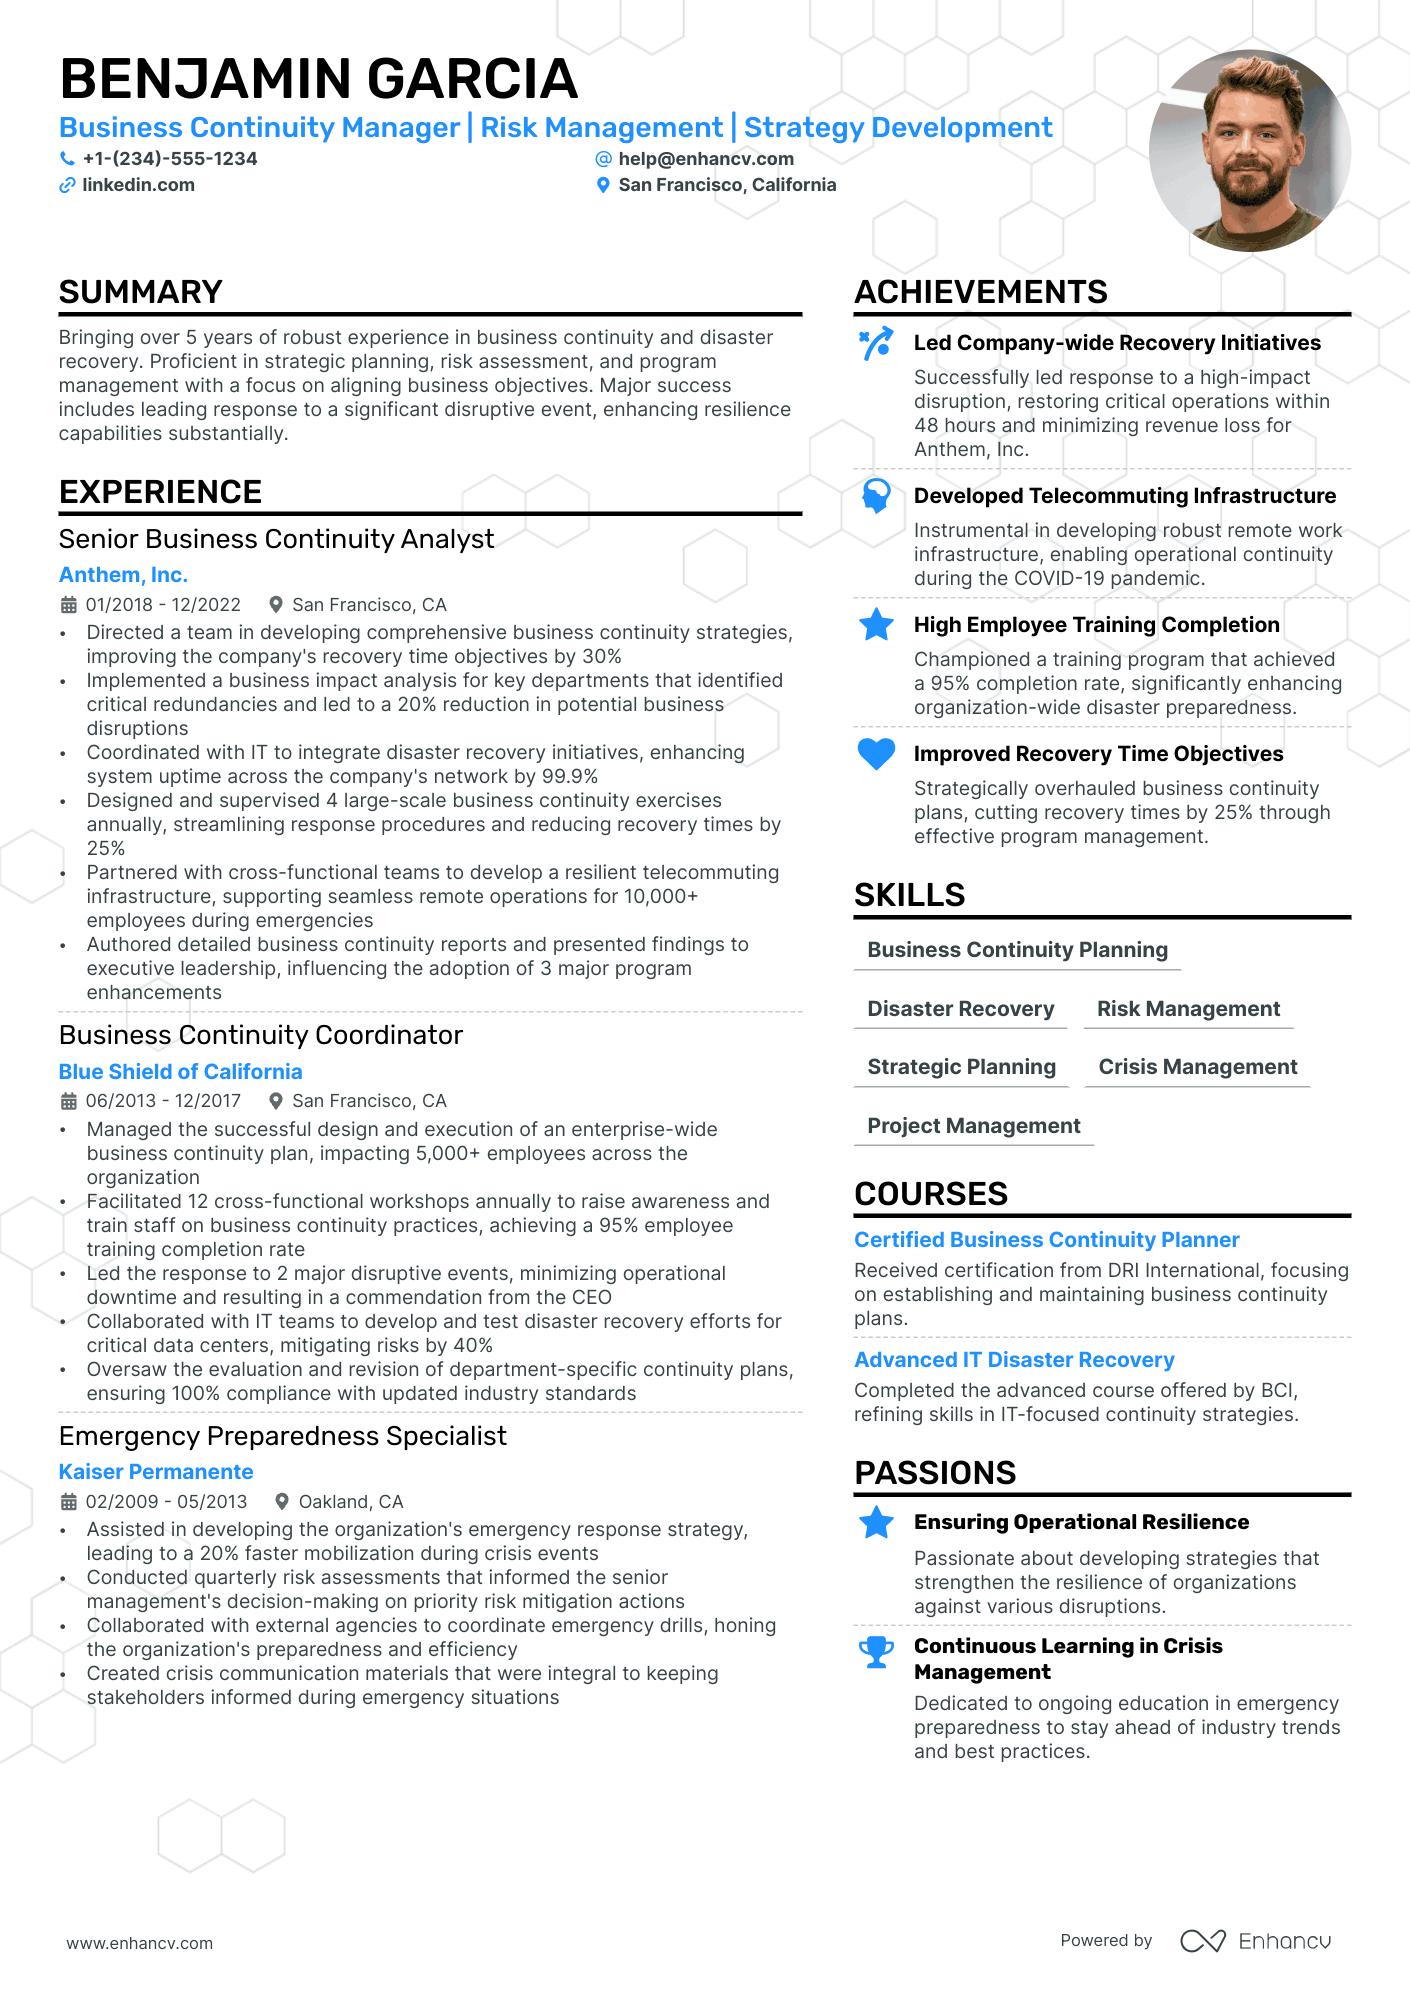 Business Continuity Manager resume example